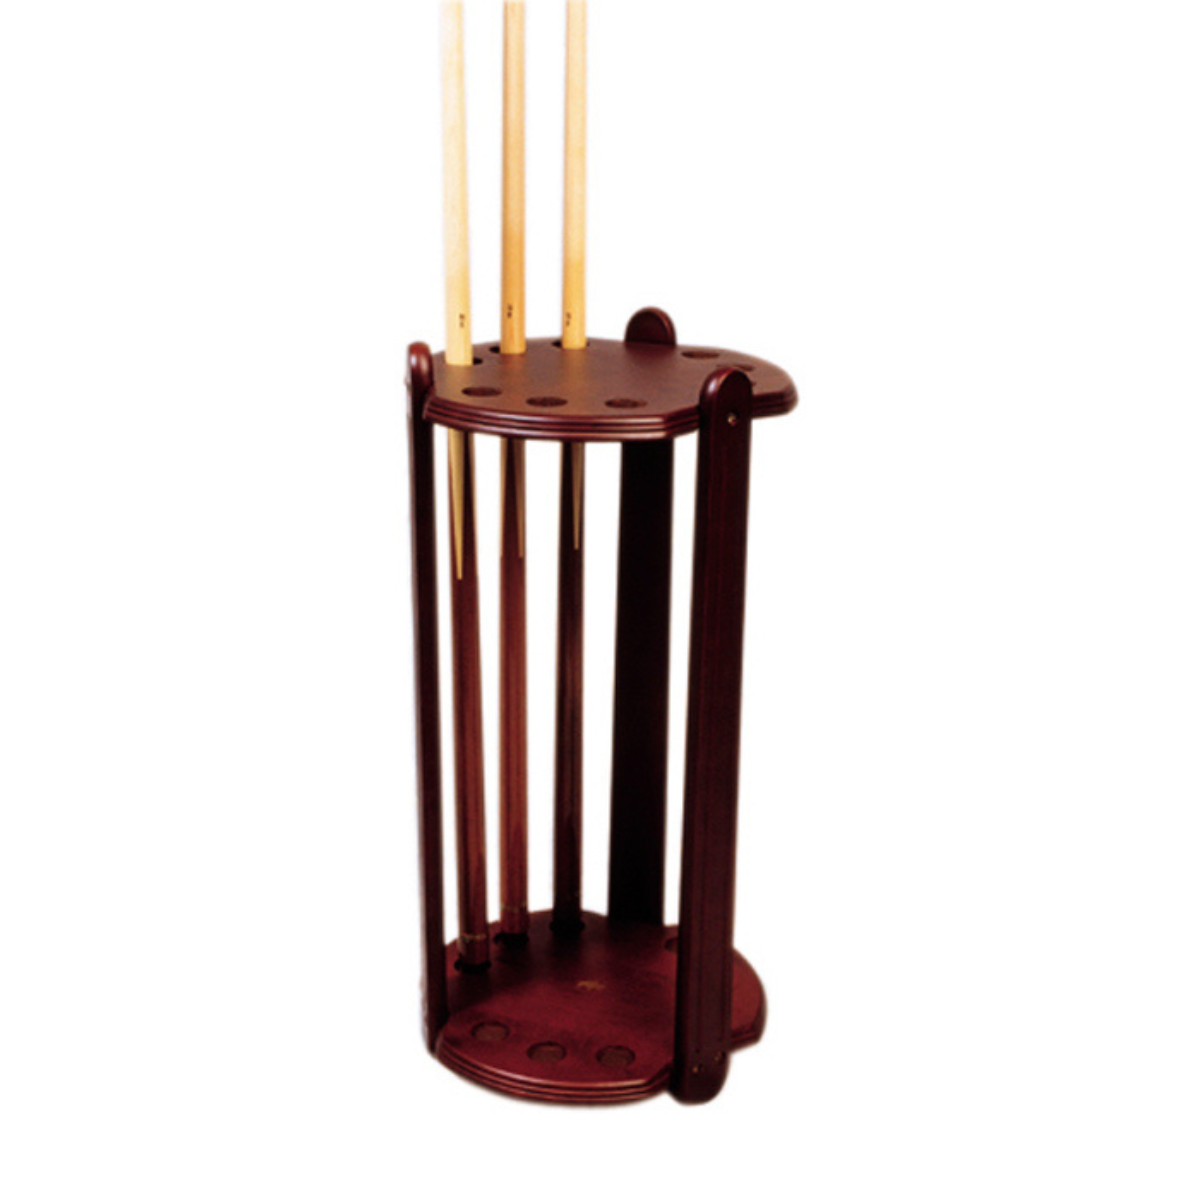 The Stand Around Pool & Snooker Cue Stand Mahogany